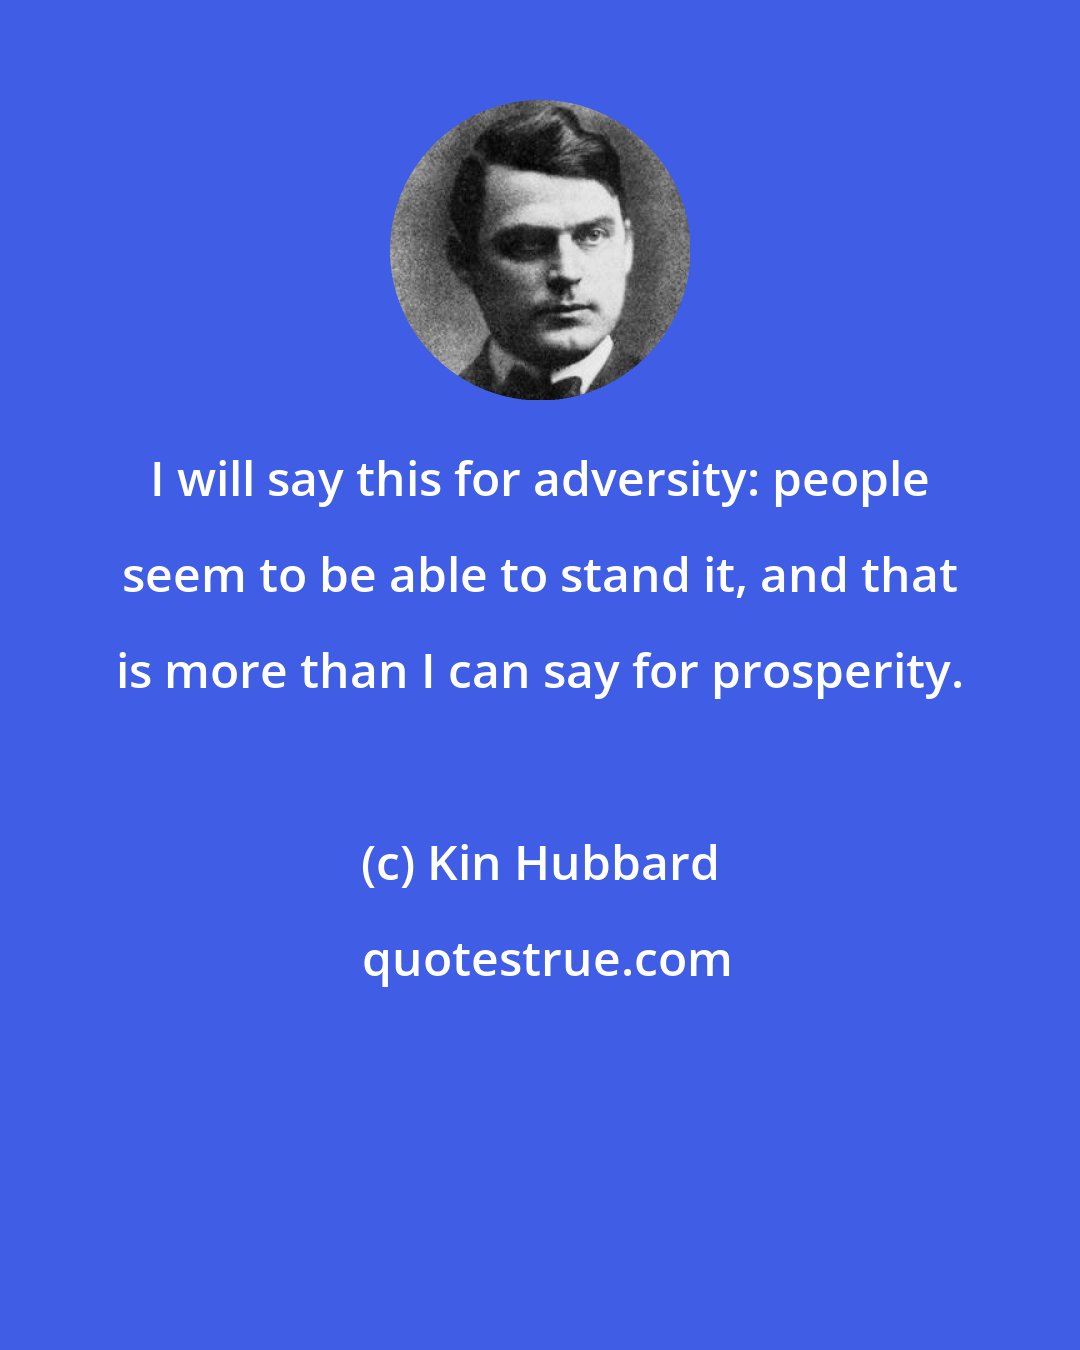 Kin Hubbard: I will say this for adversity: people seem to be able to stand it, and that is more than I can say for prosperity.